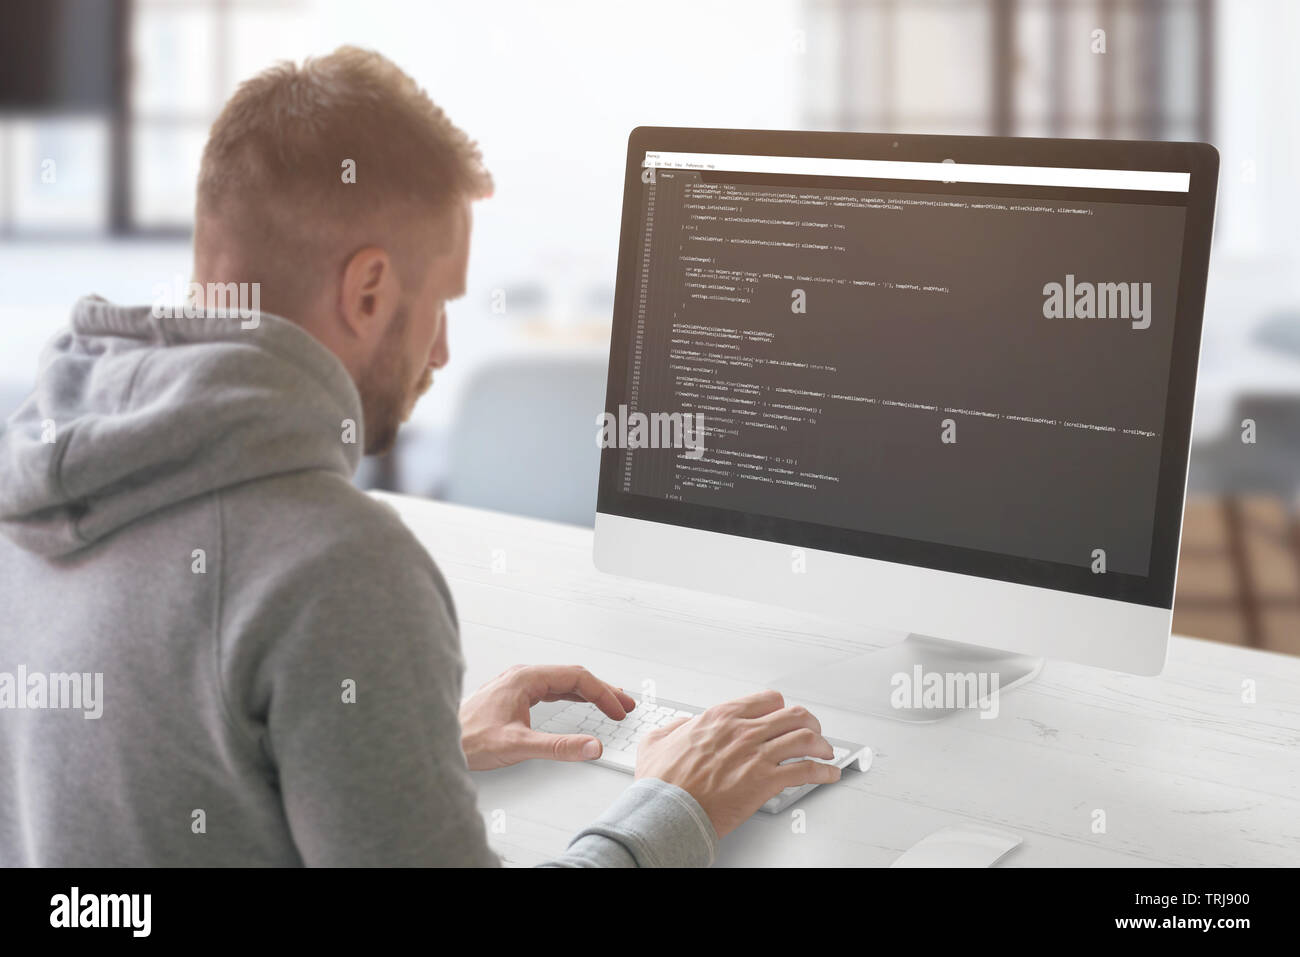 The guy programming on a computer in the office. Stock Photo